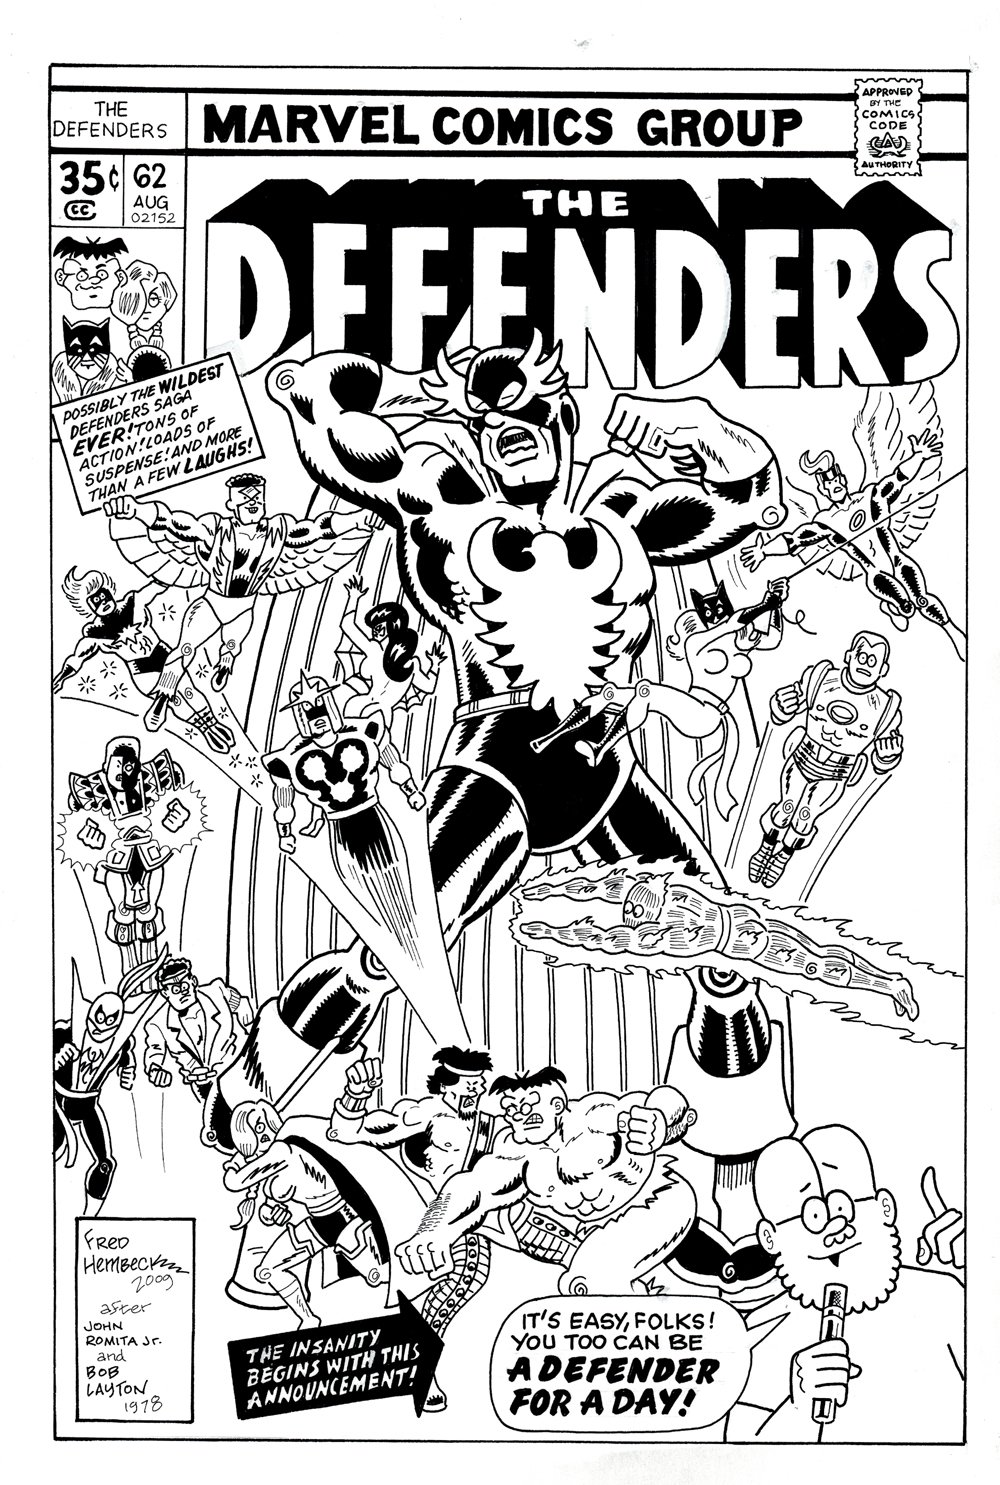 Image of Defenders #62 Cover Recreation (15 HEROES ALL BATTLING EACH OTHER!) 2009